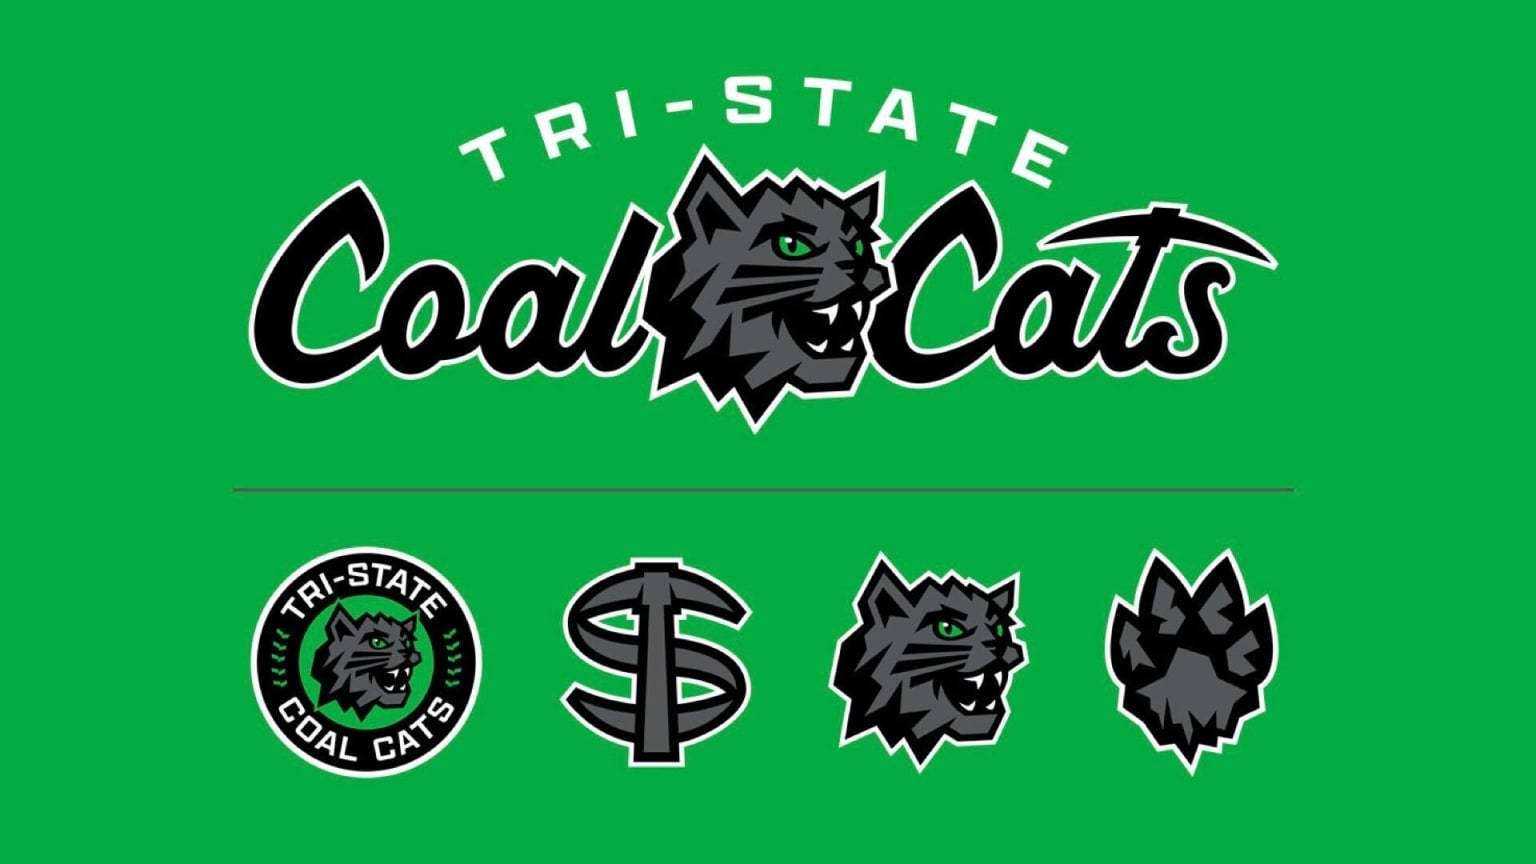 Meet the Tri-State Coal Cats